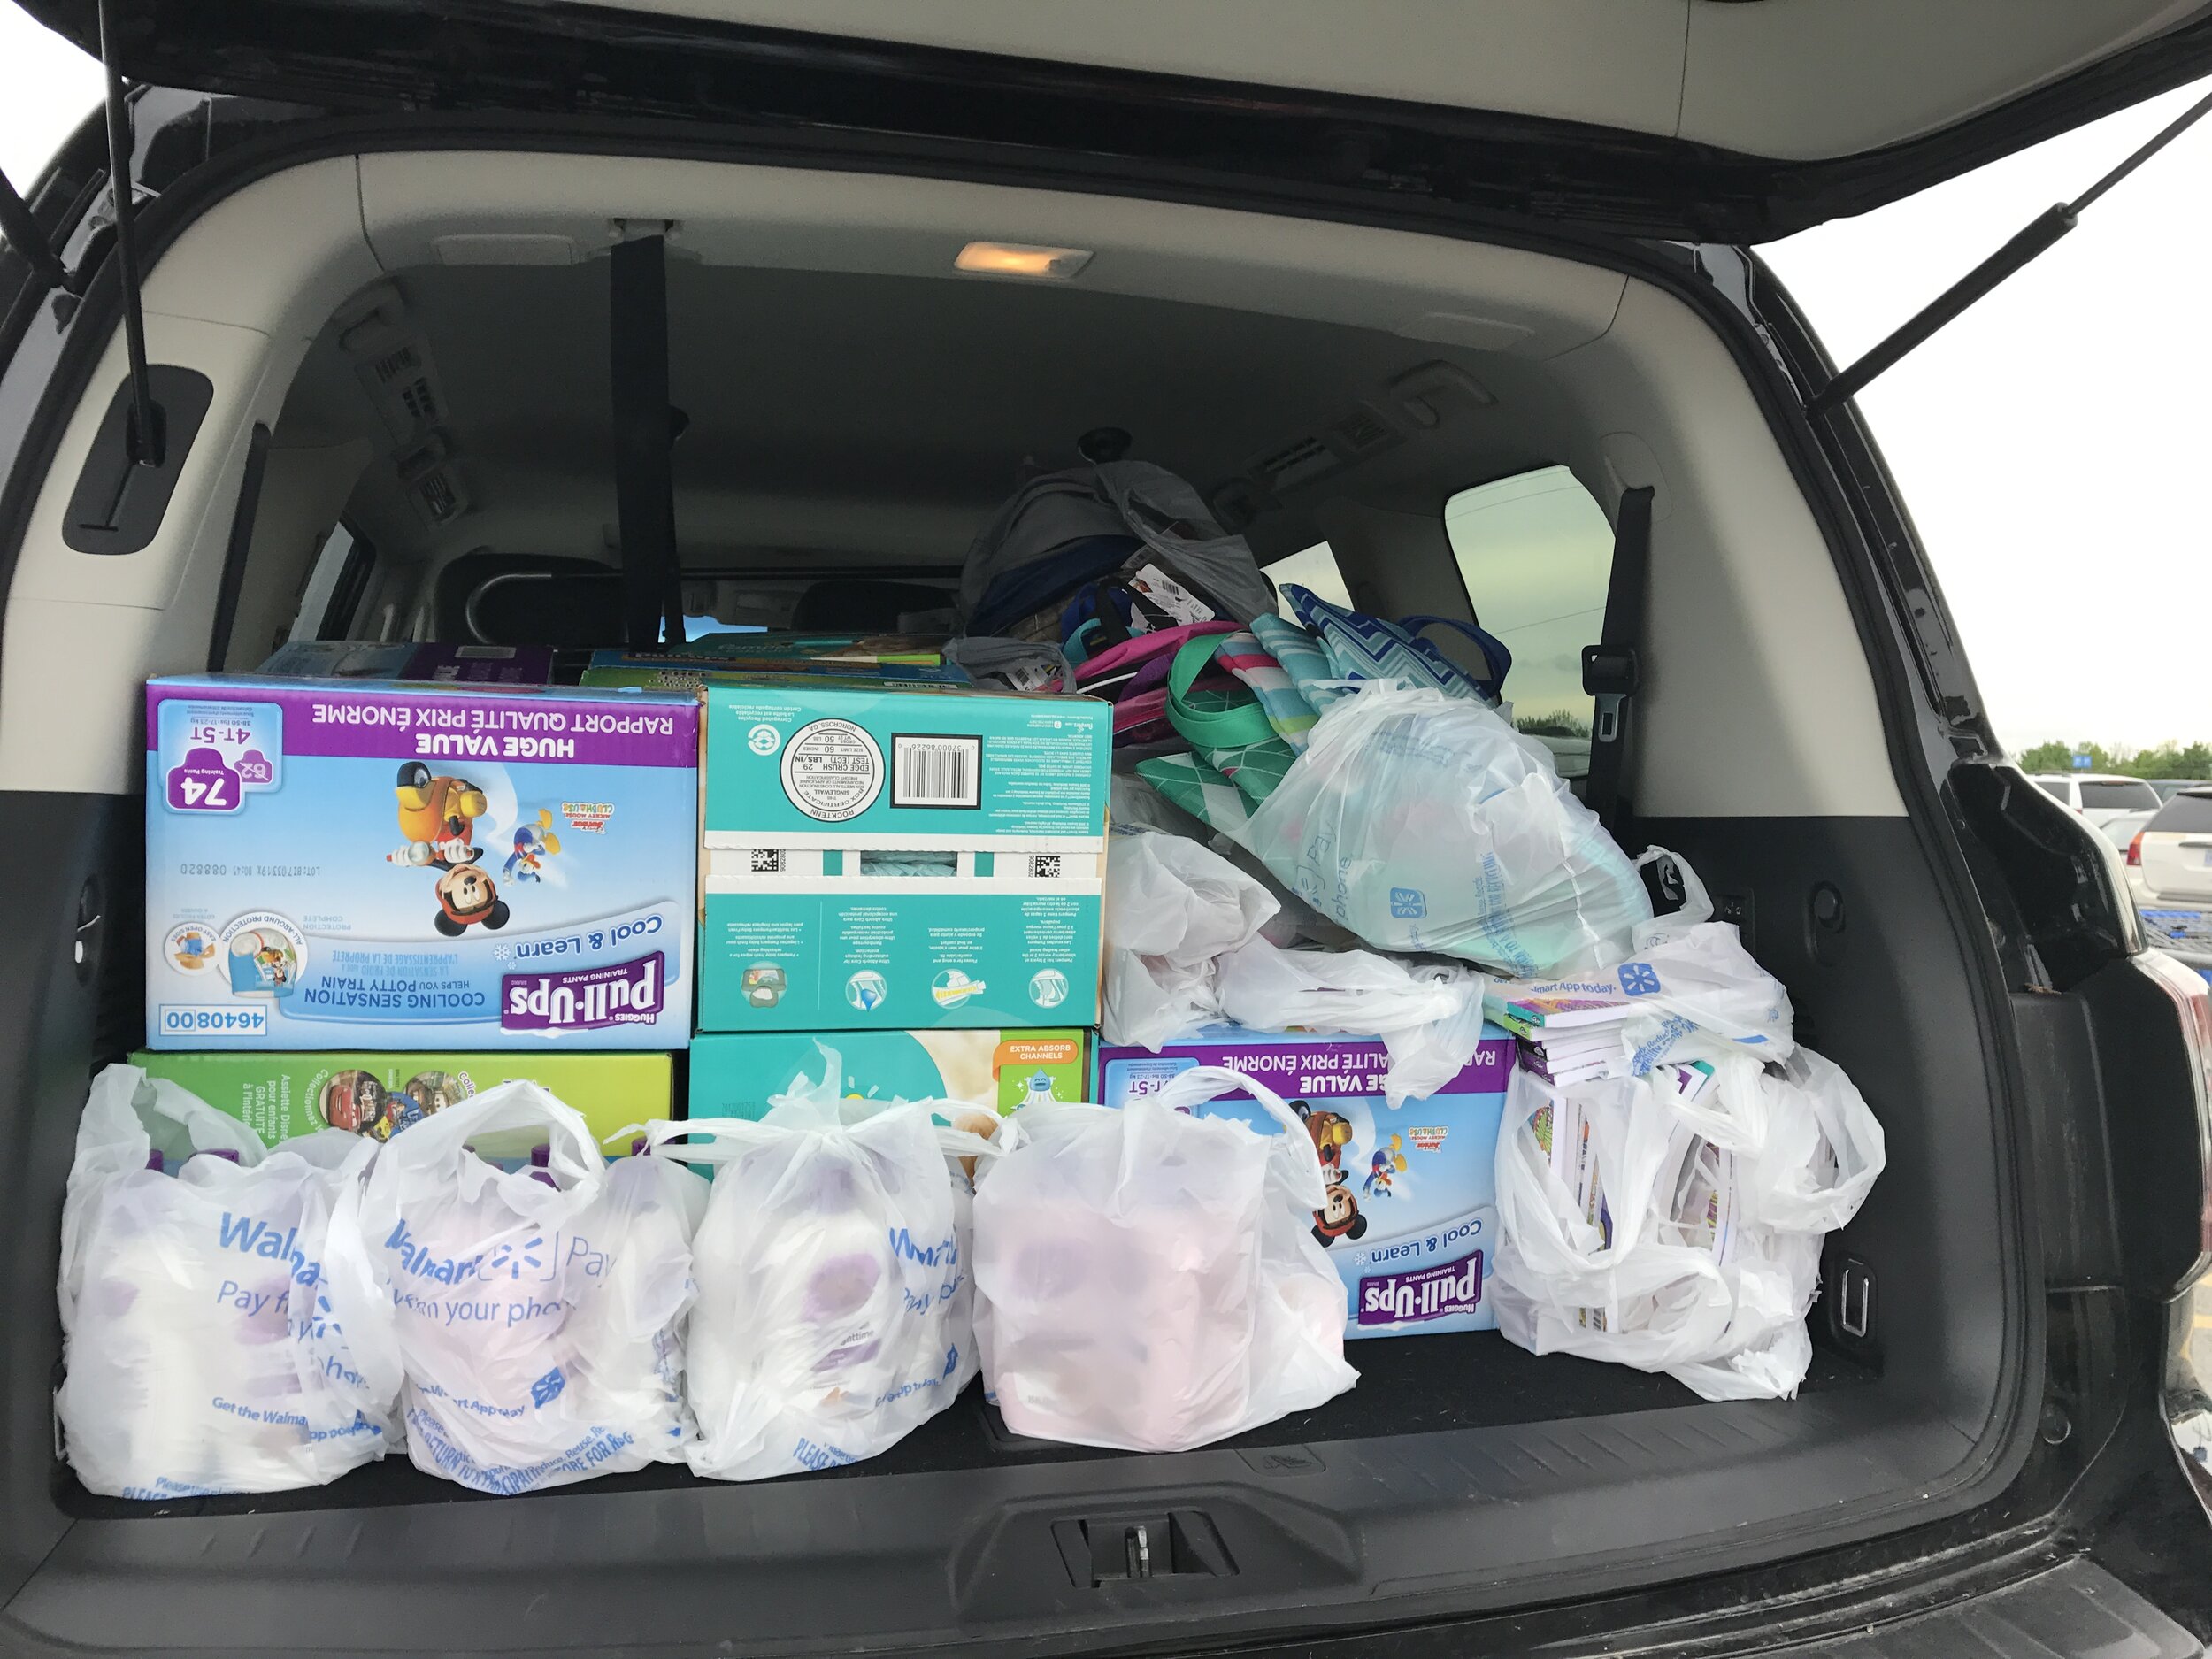 Diapers for foster kids - foster kid donations - oklahoma fostering